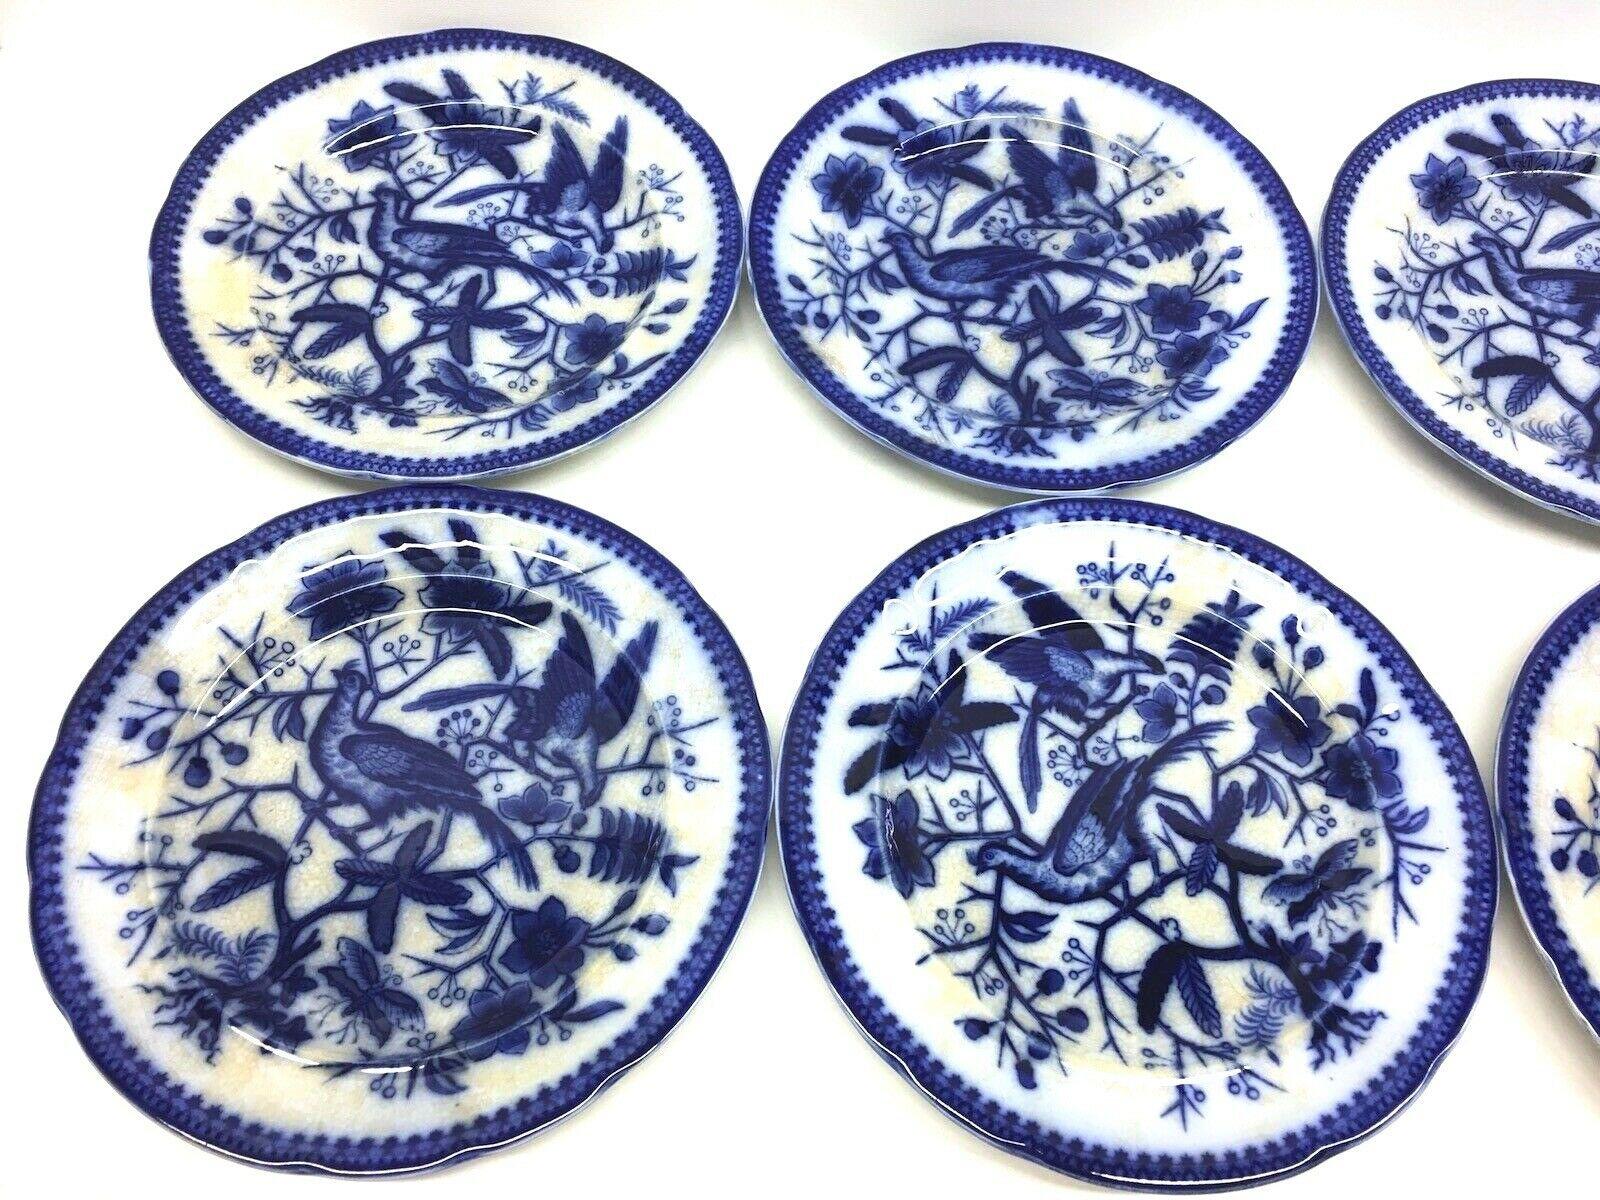 A set of six porcelain flow blue plates, made by Villeroy and Boch, Germany, circa 1890s or older. 
Images show a hand painted Pheasant pattern. This is a set of six plates, very nice for your table. Signed on the base.